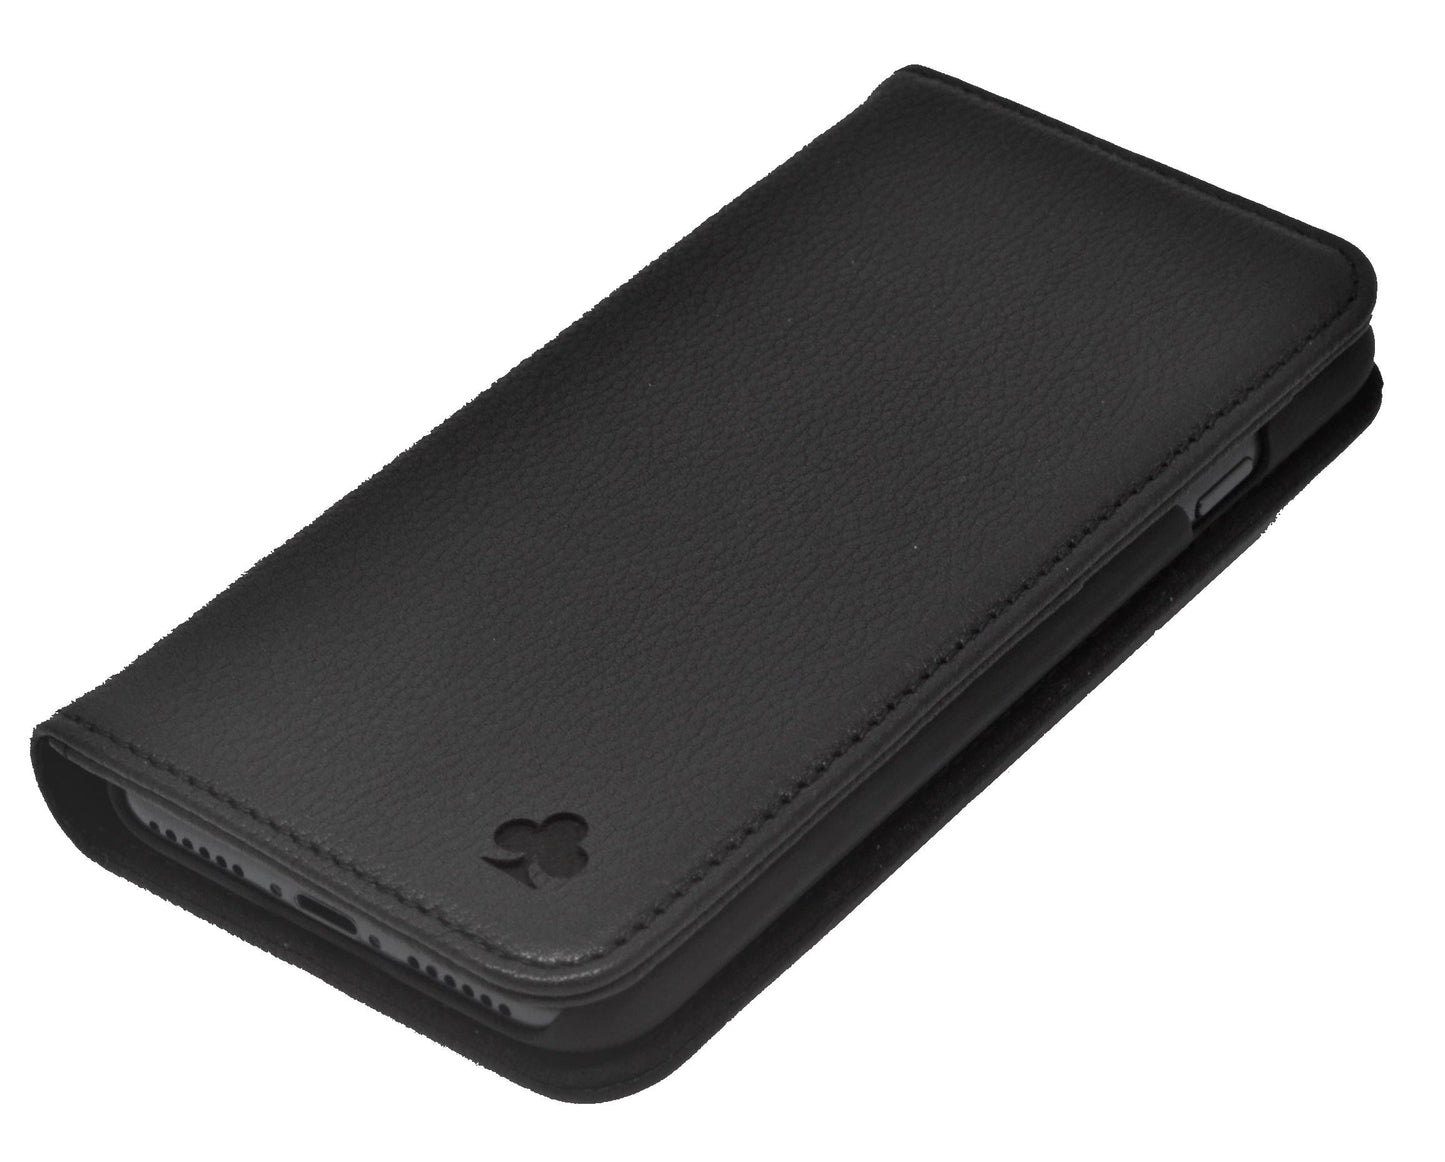 Samsung Galaxy S22 Leather Case. Premium Slim Genuine Leather Stand Case/Cover/Wallet (Black)